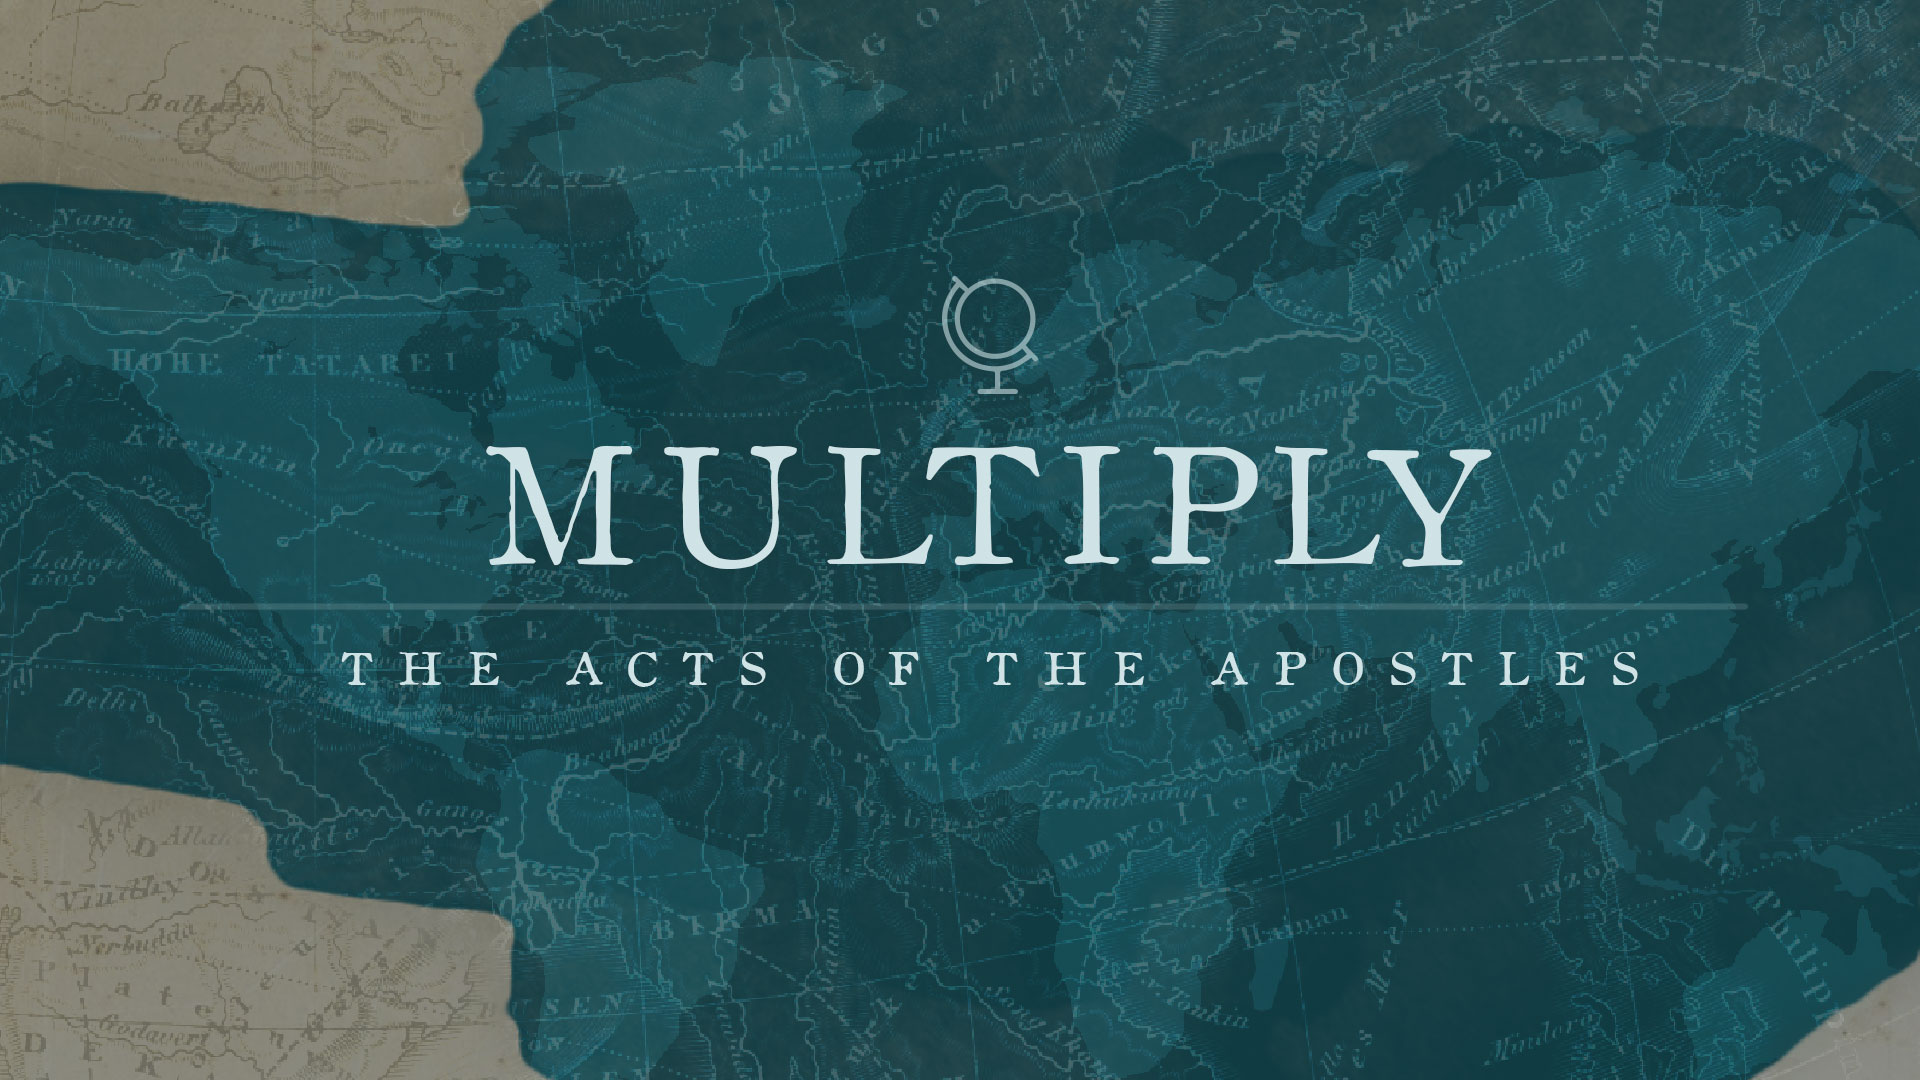 August 27, 2017 | Acts 4:1-31| 